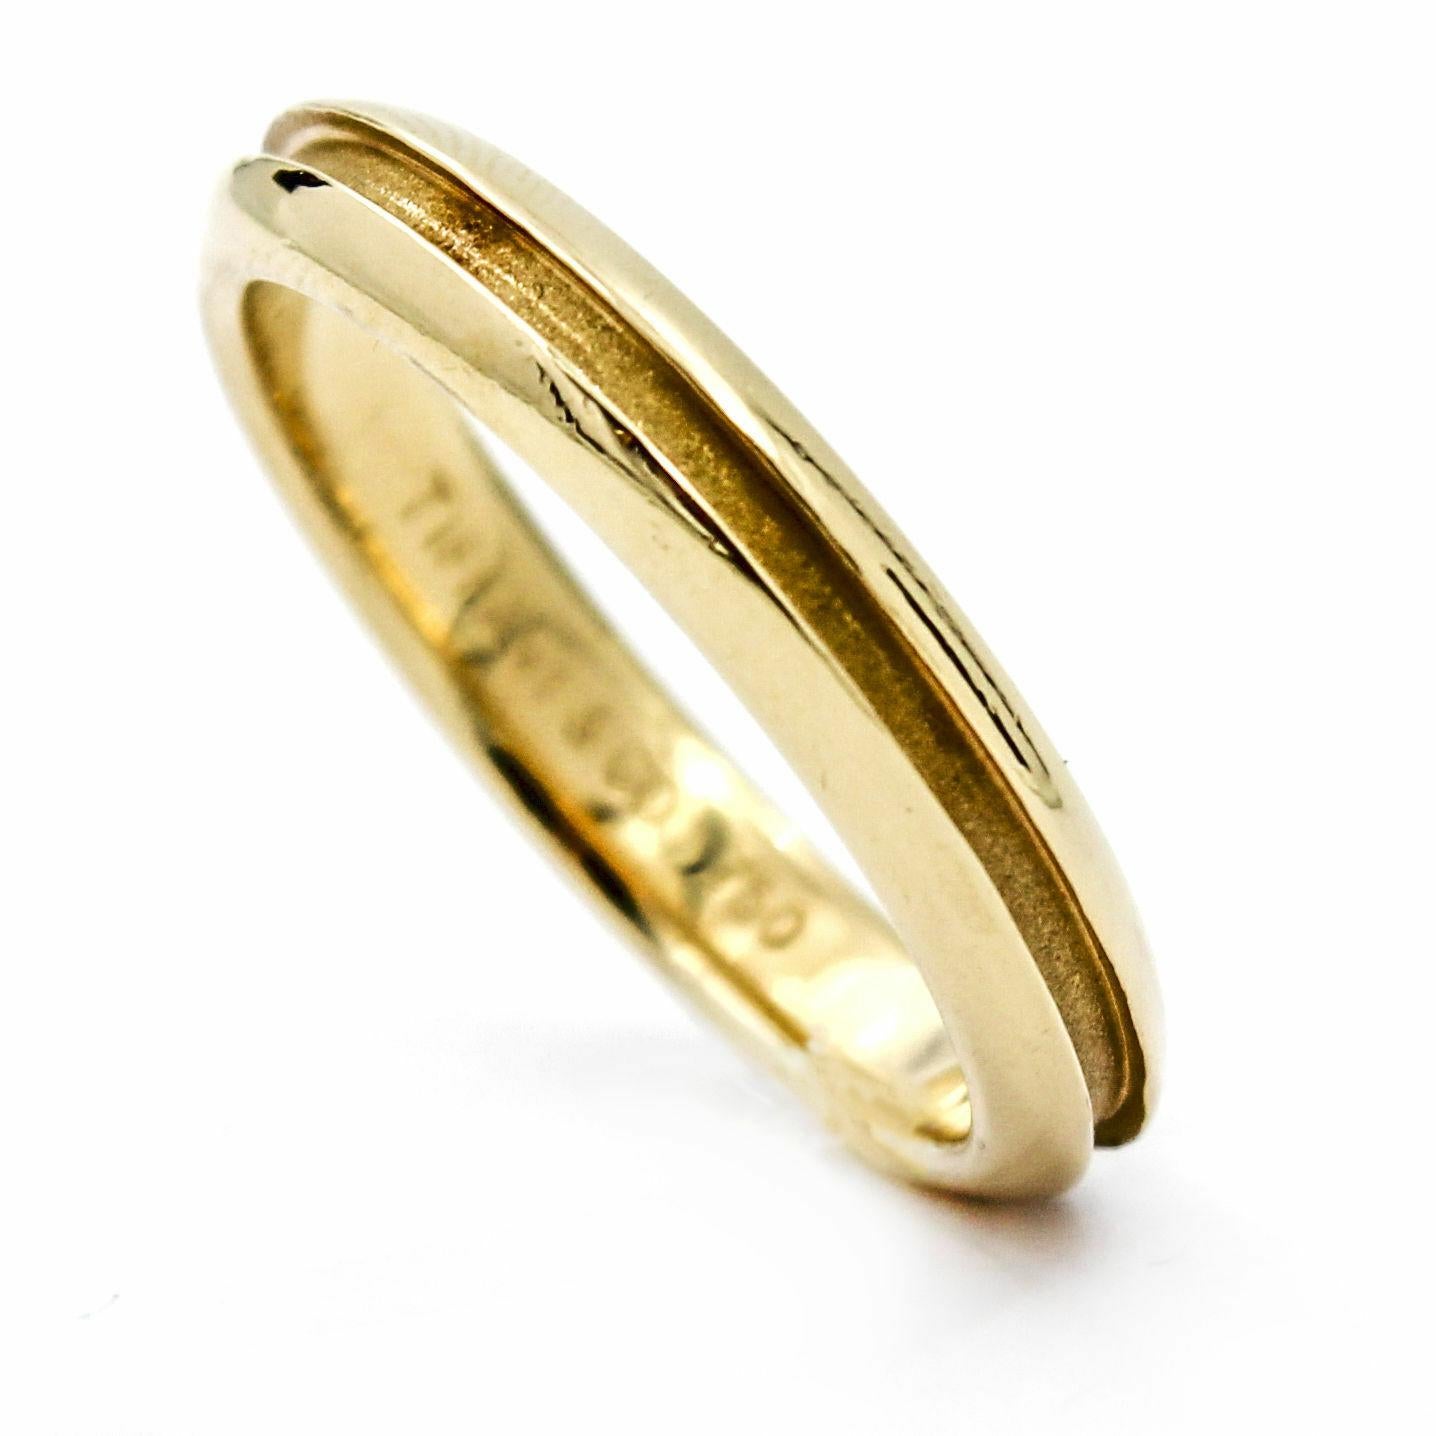 Tiffany & Co. 3.5 mm yellow gold wedding band. Size 6.5. Retired. Pictures provided are of the actual item for sale. 

Previously owned. In excellent condition with expected wear. Tiffany box not included. Professionally cleaned and